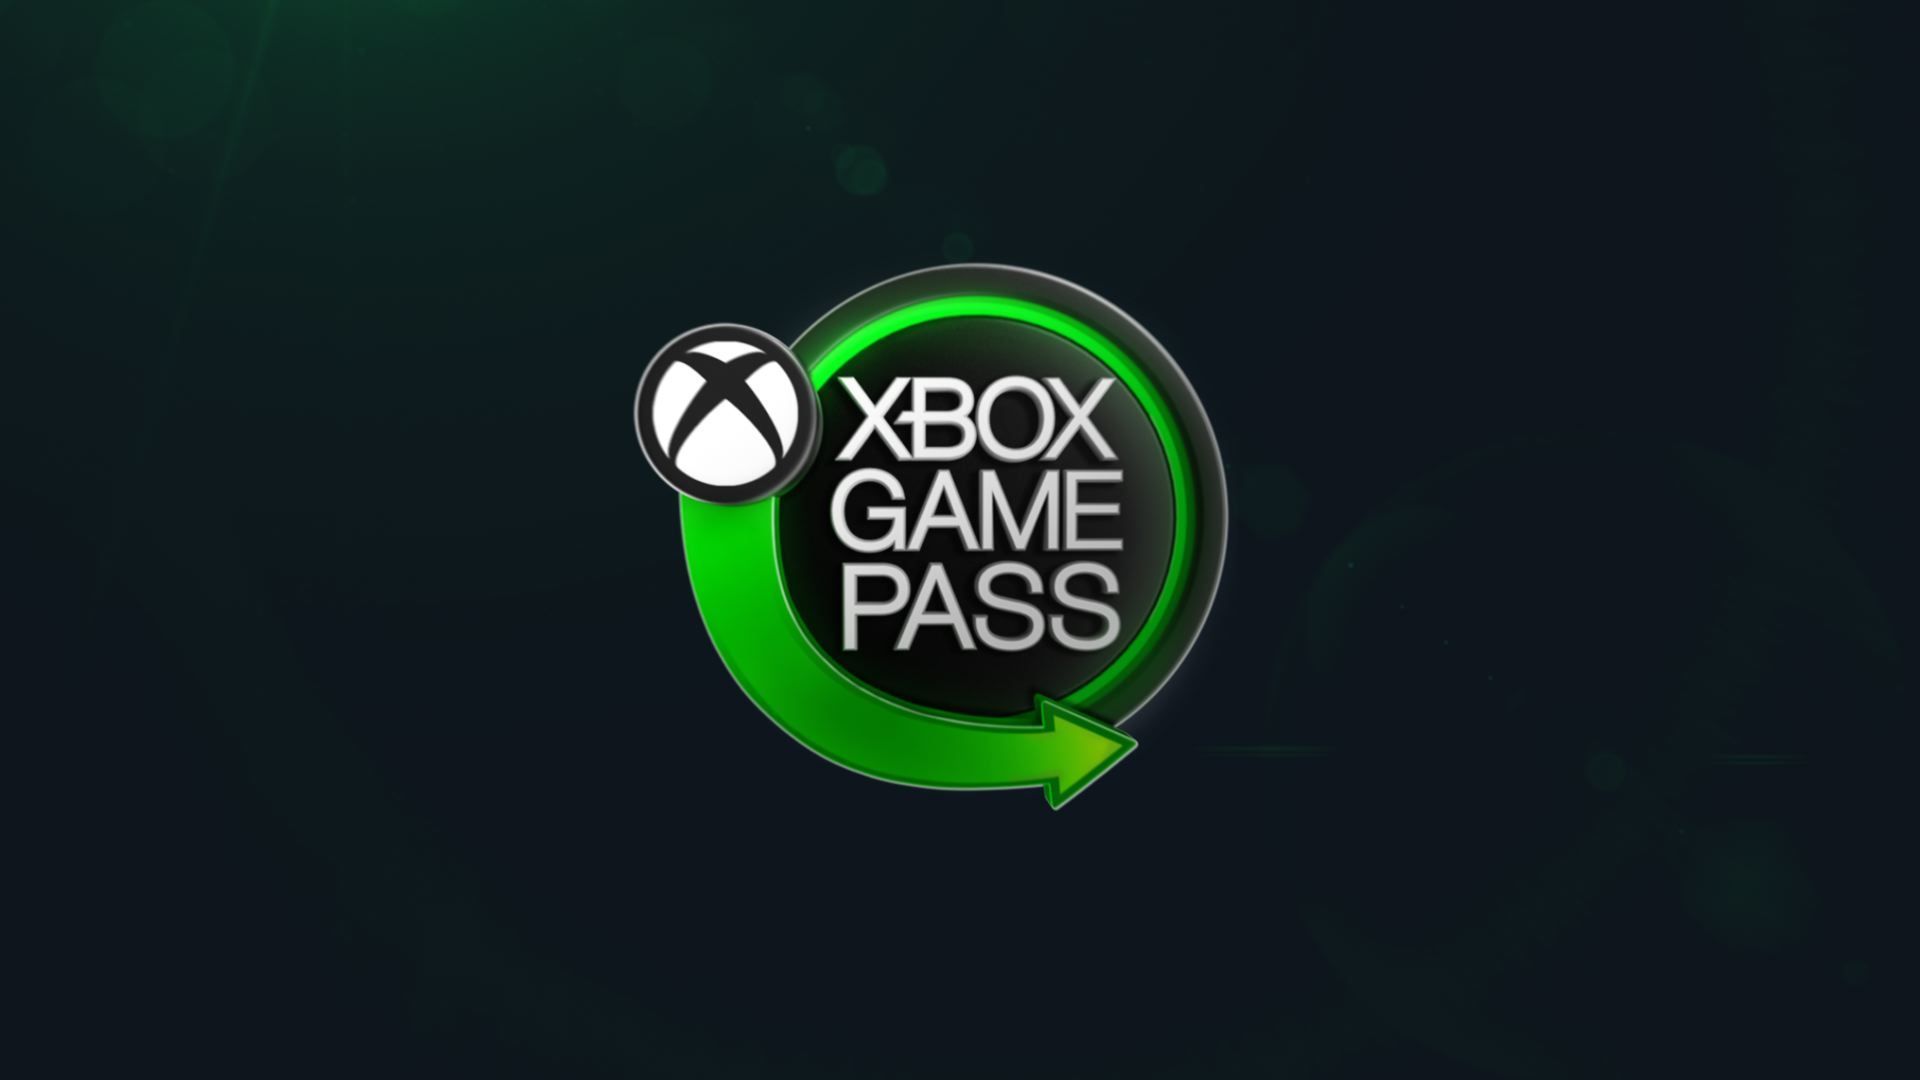 Xbox Game Pass at X019: Announcing Over 50 New Games, and Ultimate Holiday Offer